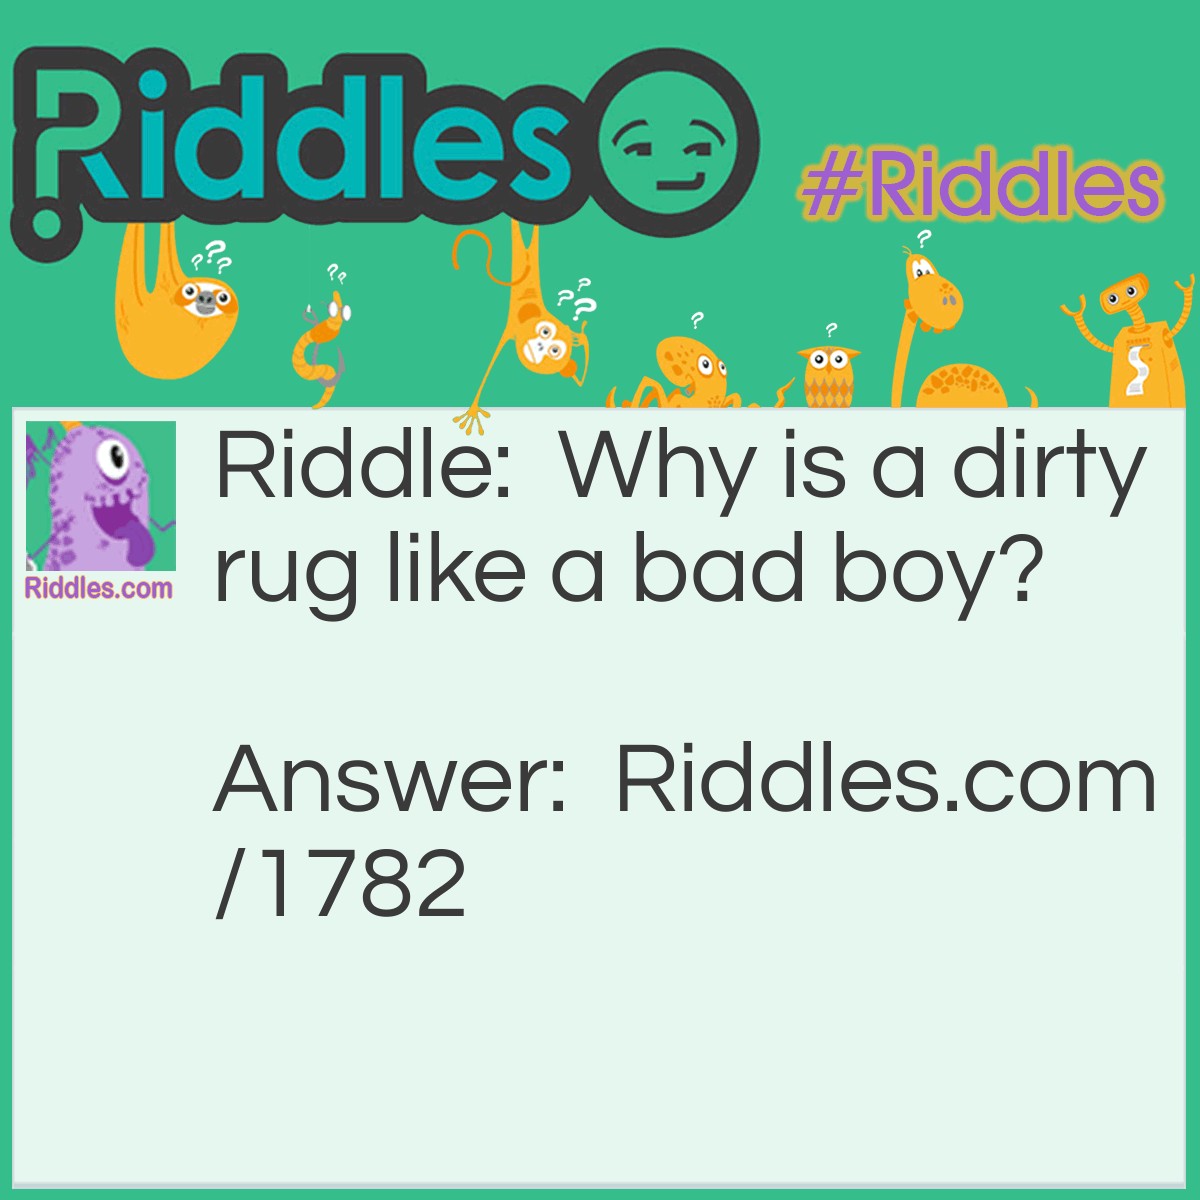 Riddle: Why is a dirty rug like a bad boy? Answer: Both need beating.